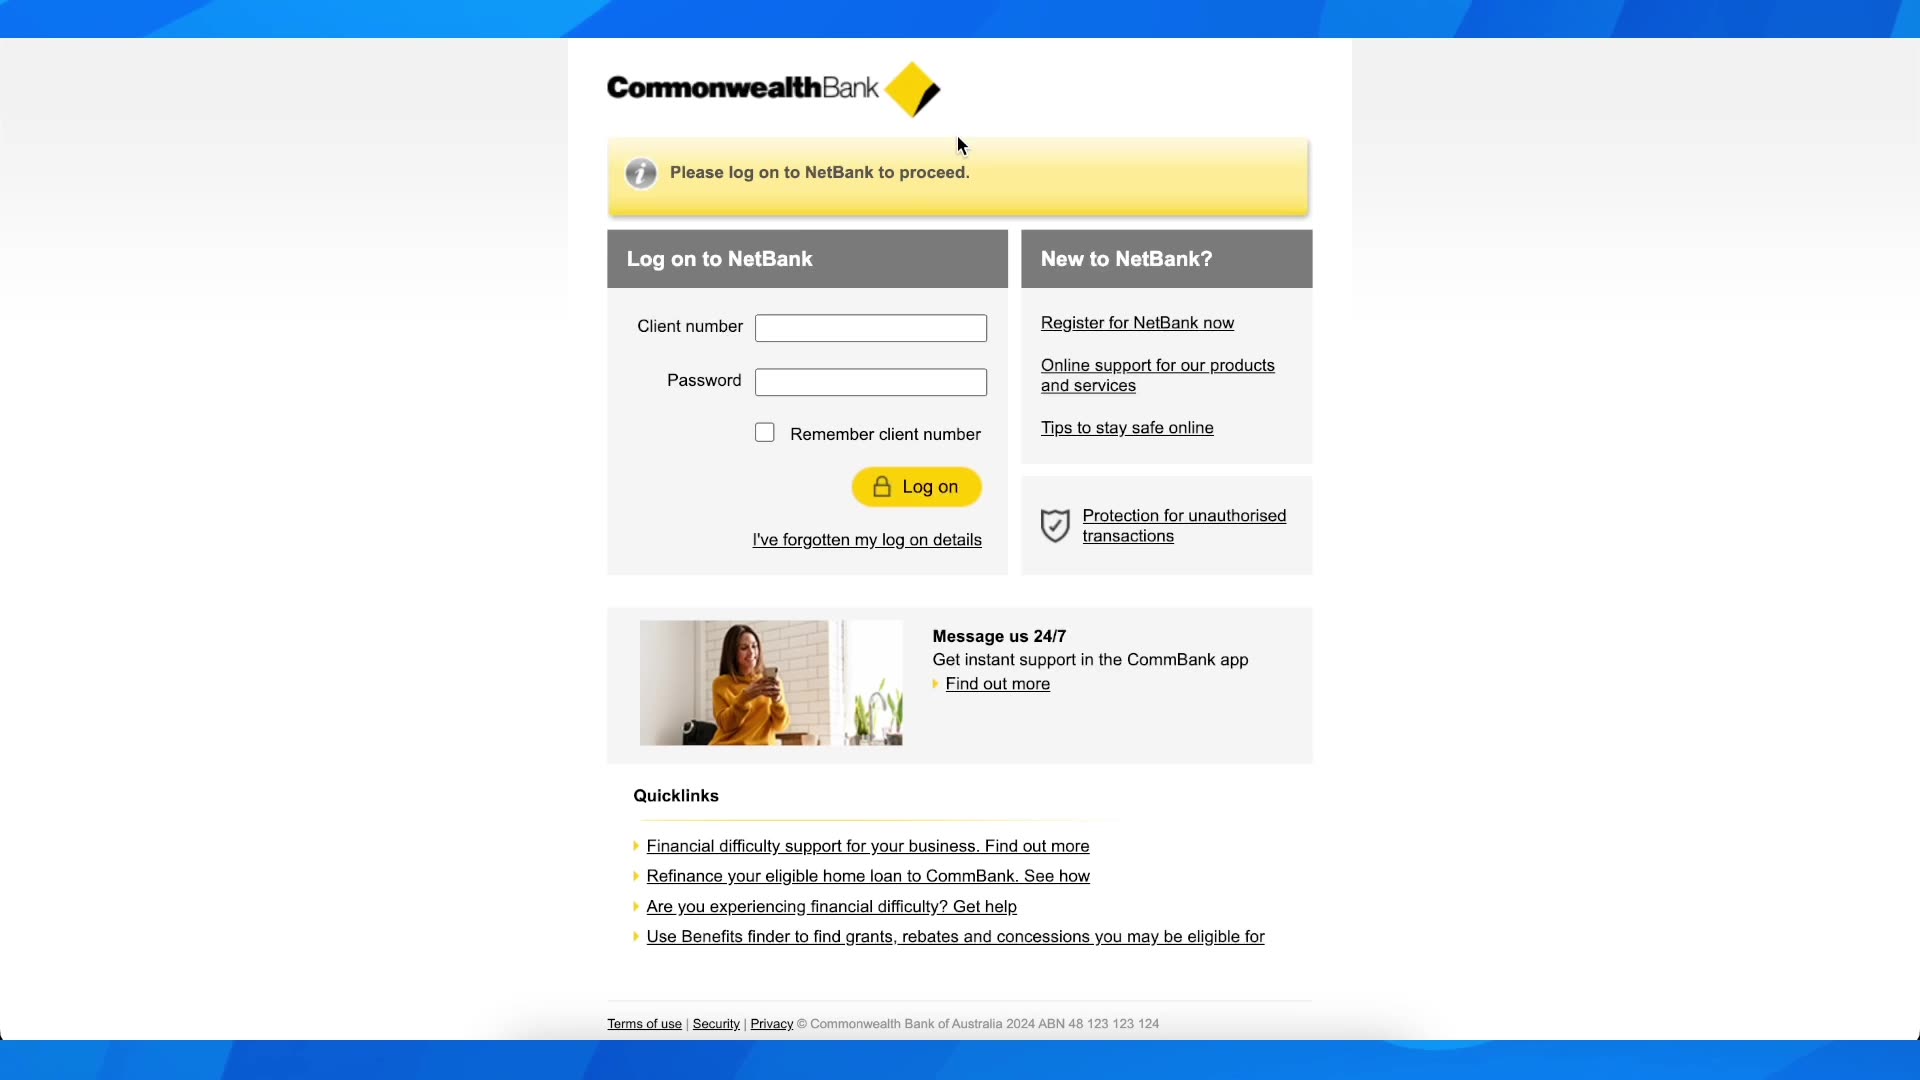 How To Transfer Money from Commonwealth Bank to Overseas